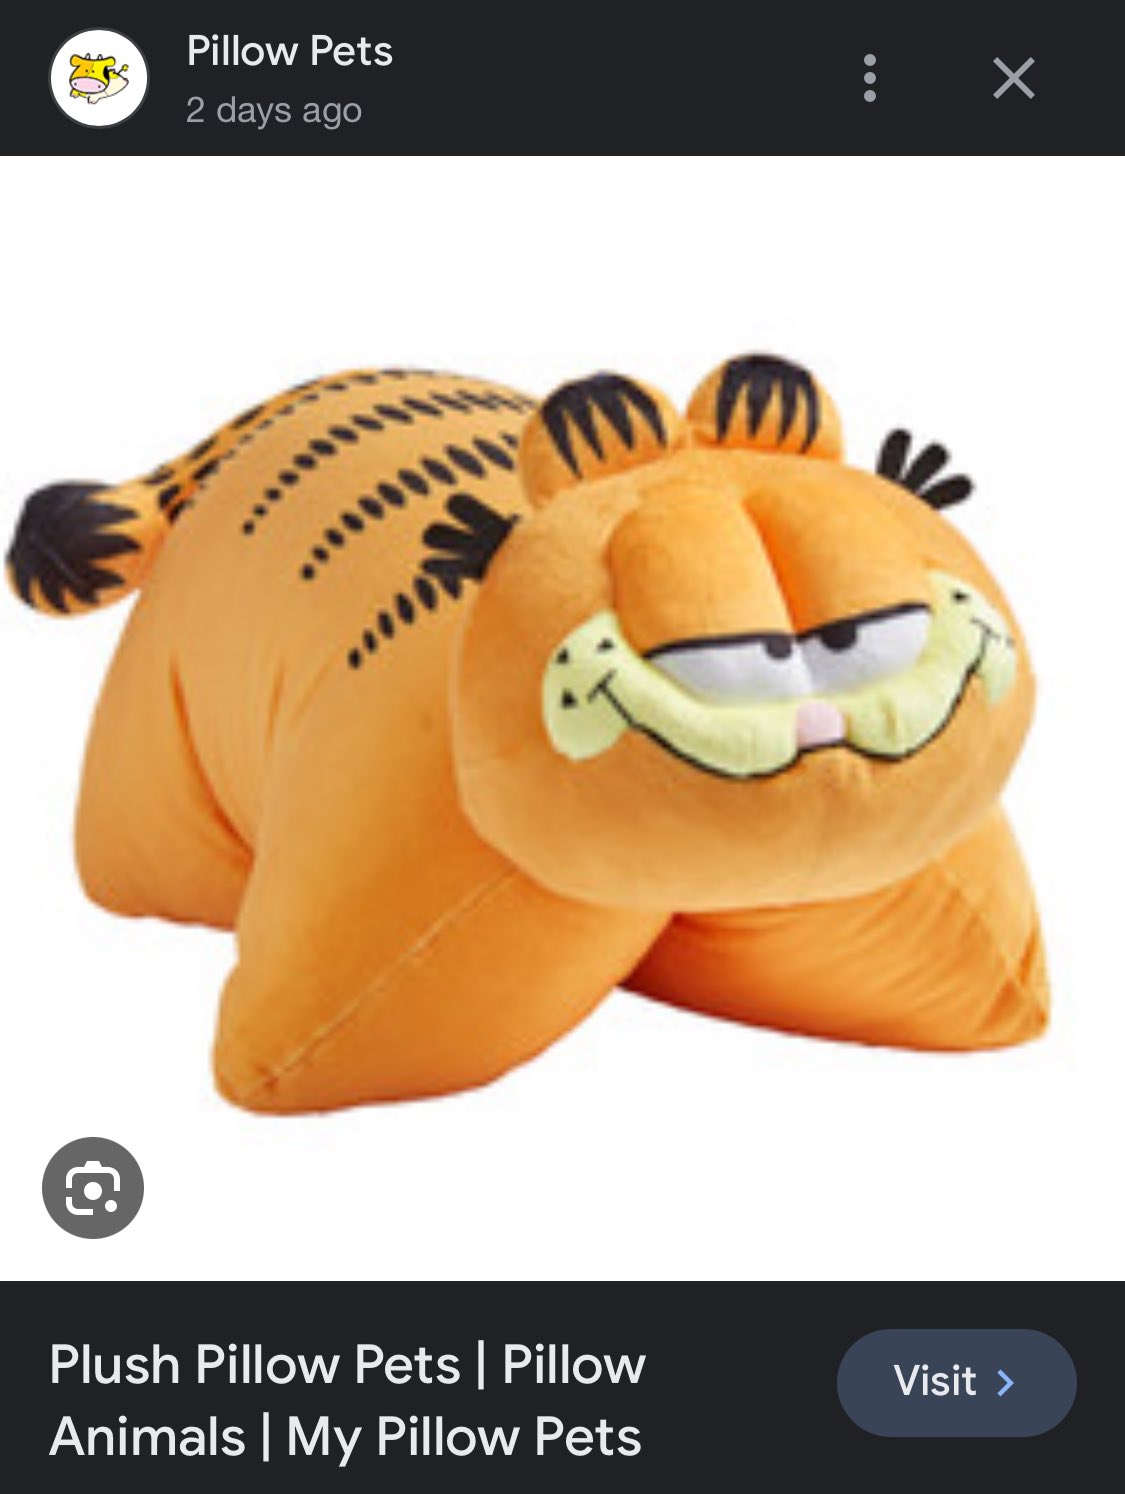 Quinton Reviews - #1 GARFIELD FAN 🎬 on X: Garfield News: It seems that  Pillow Pets is about to announce a Garfield plush based on a fan design.  Google image results briefly